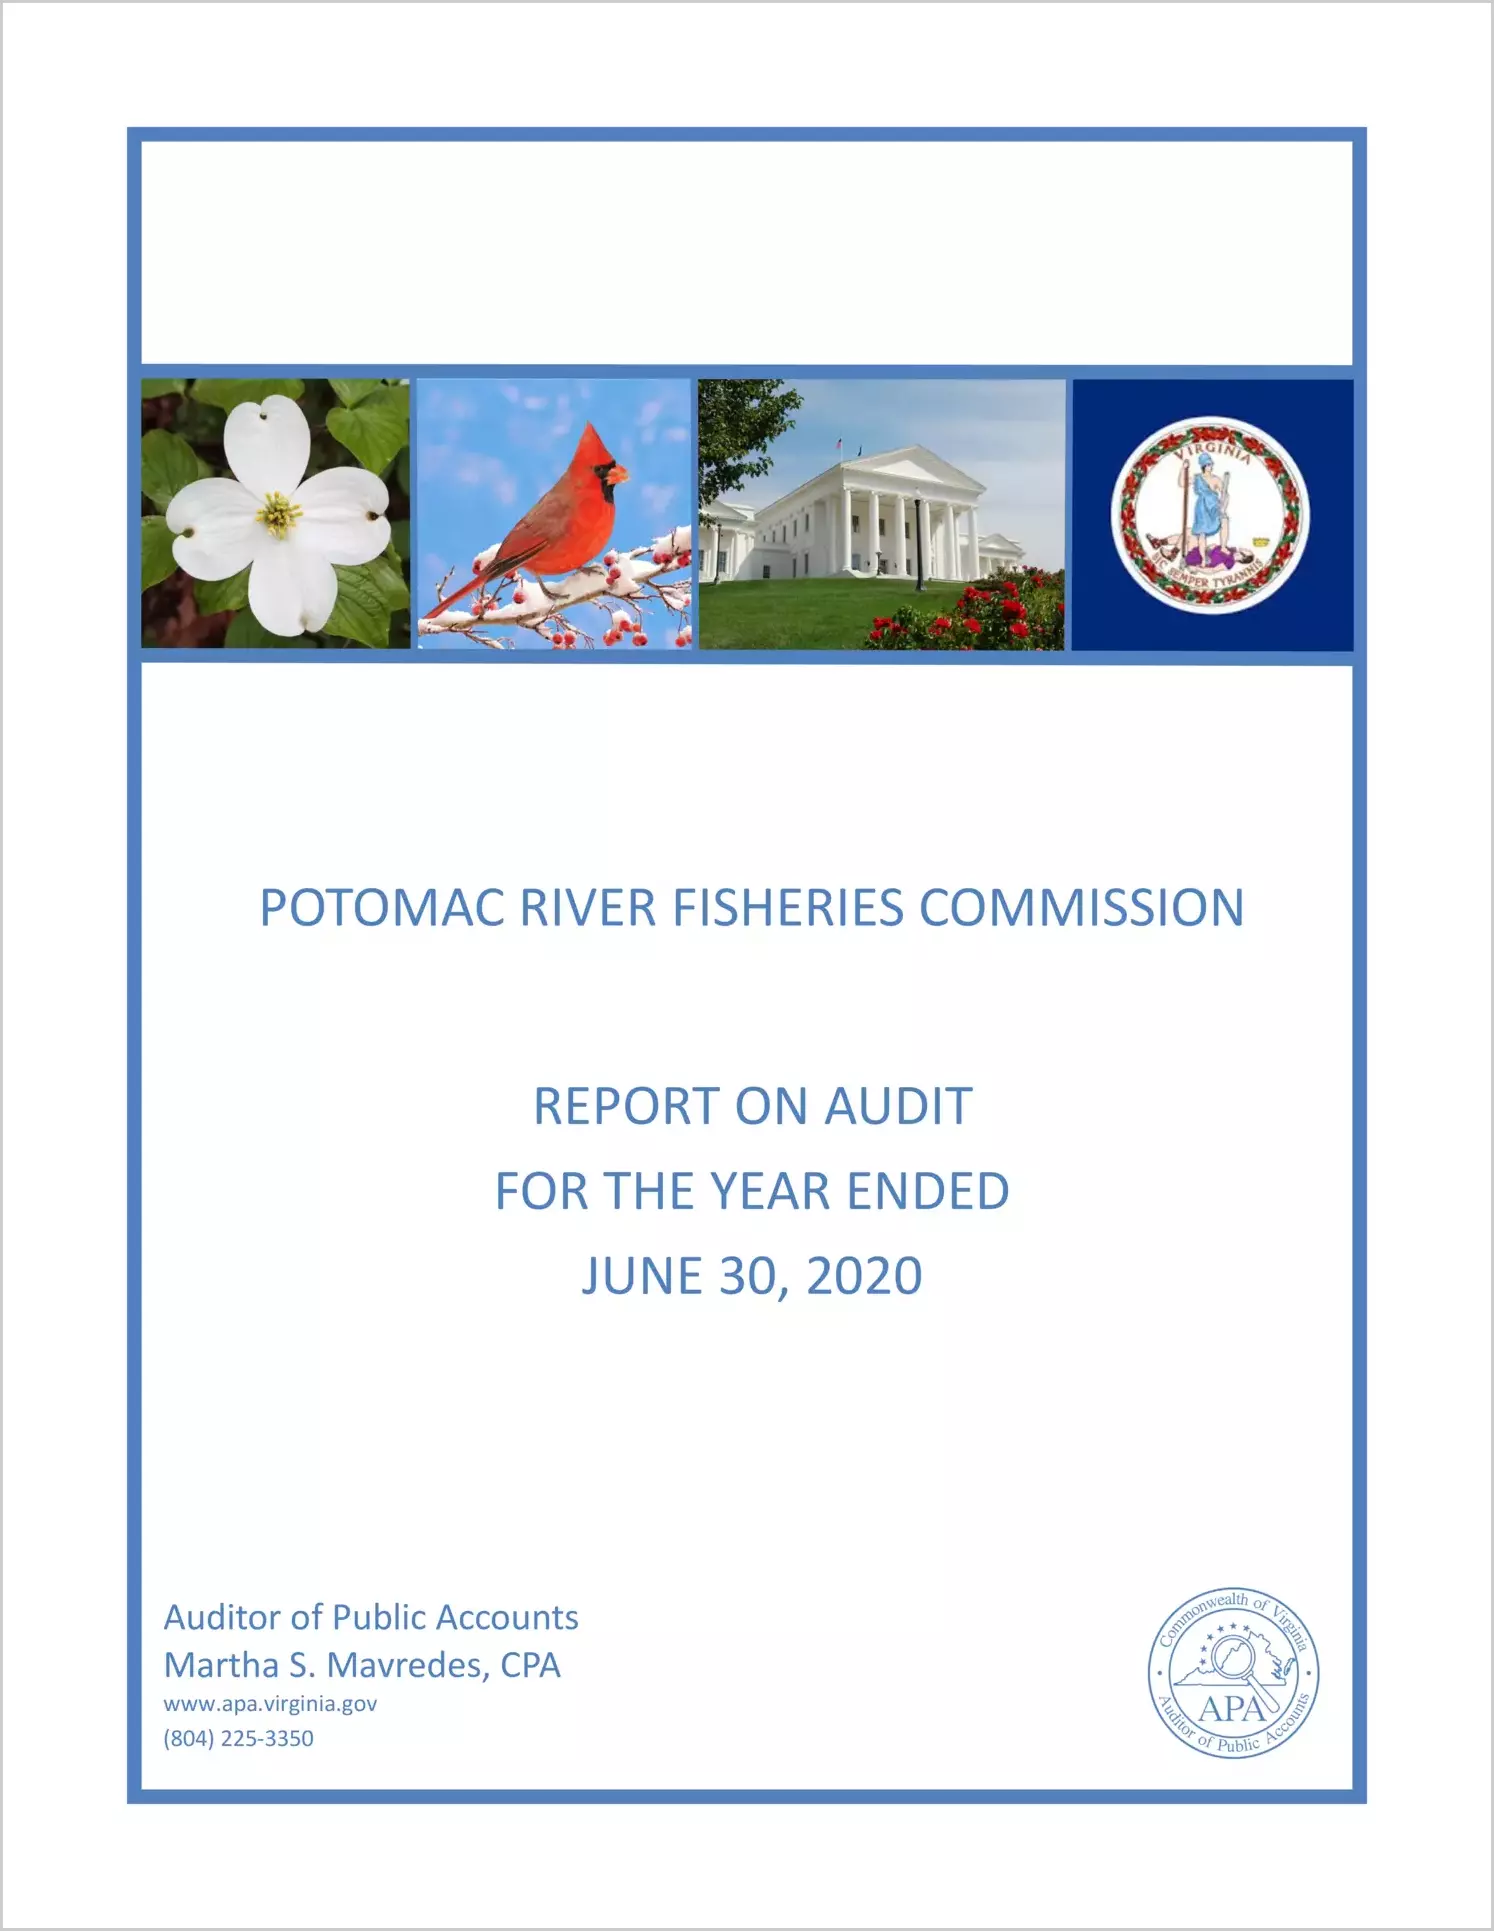 Potomac River Fisheries Commission for the year ended June 30, 2020